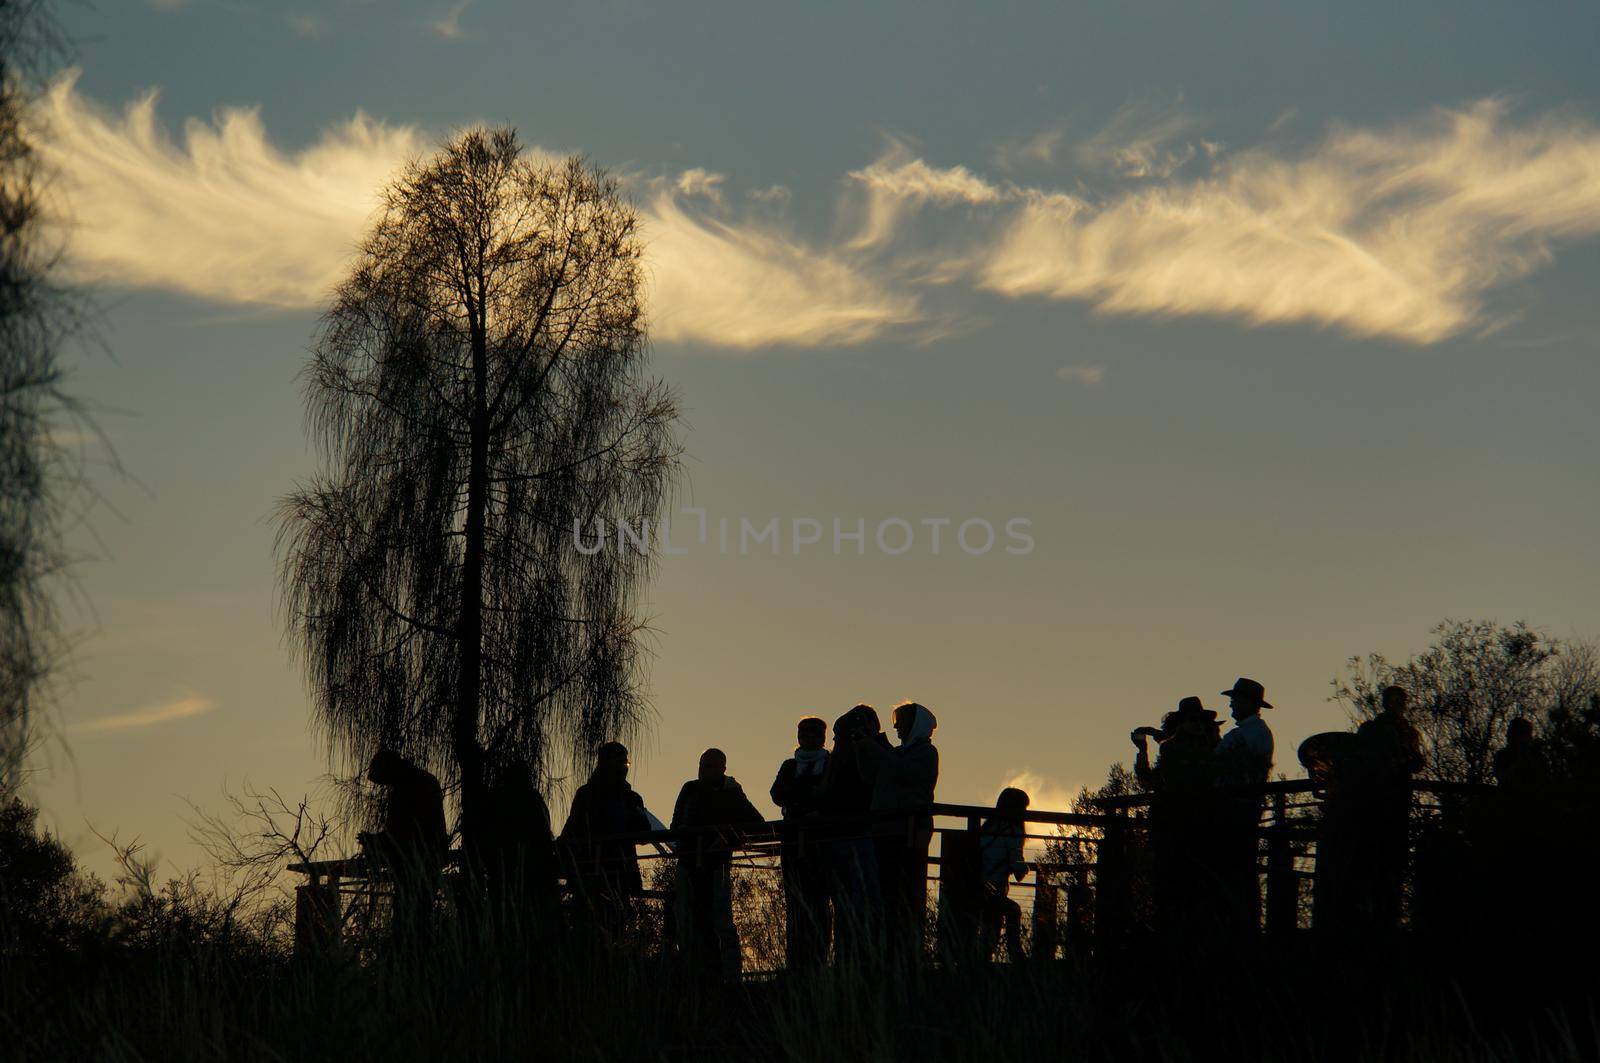 Ayers Rock, Australia April 30, 2015: silhouette of tourists enyoing sunrise at Uluru, ayers Rock, the Red Center of Australia, Australia by bettercallcurry